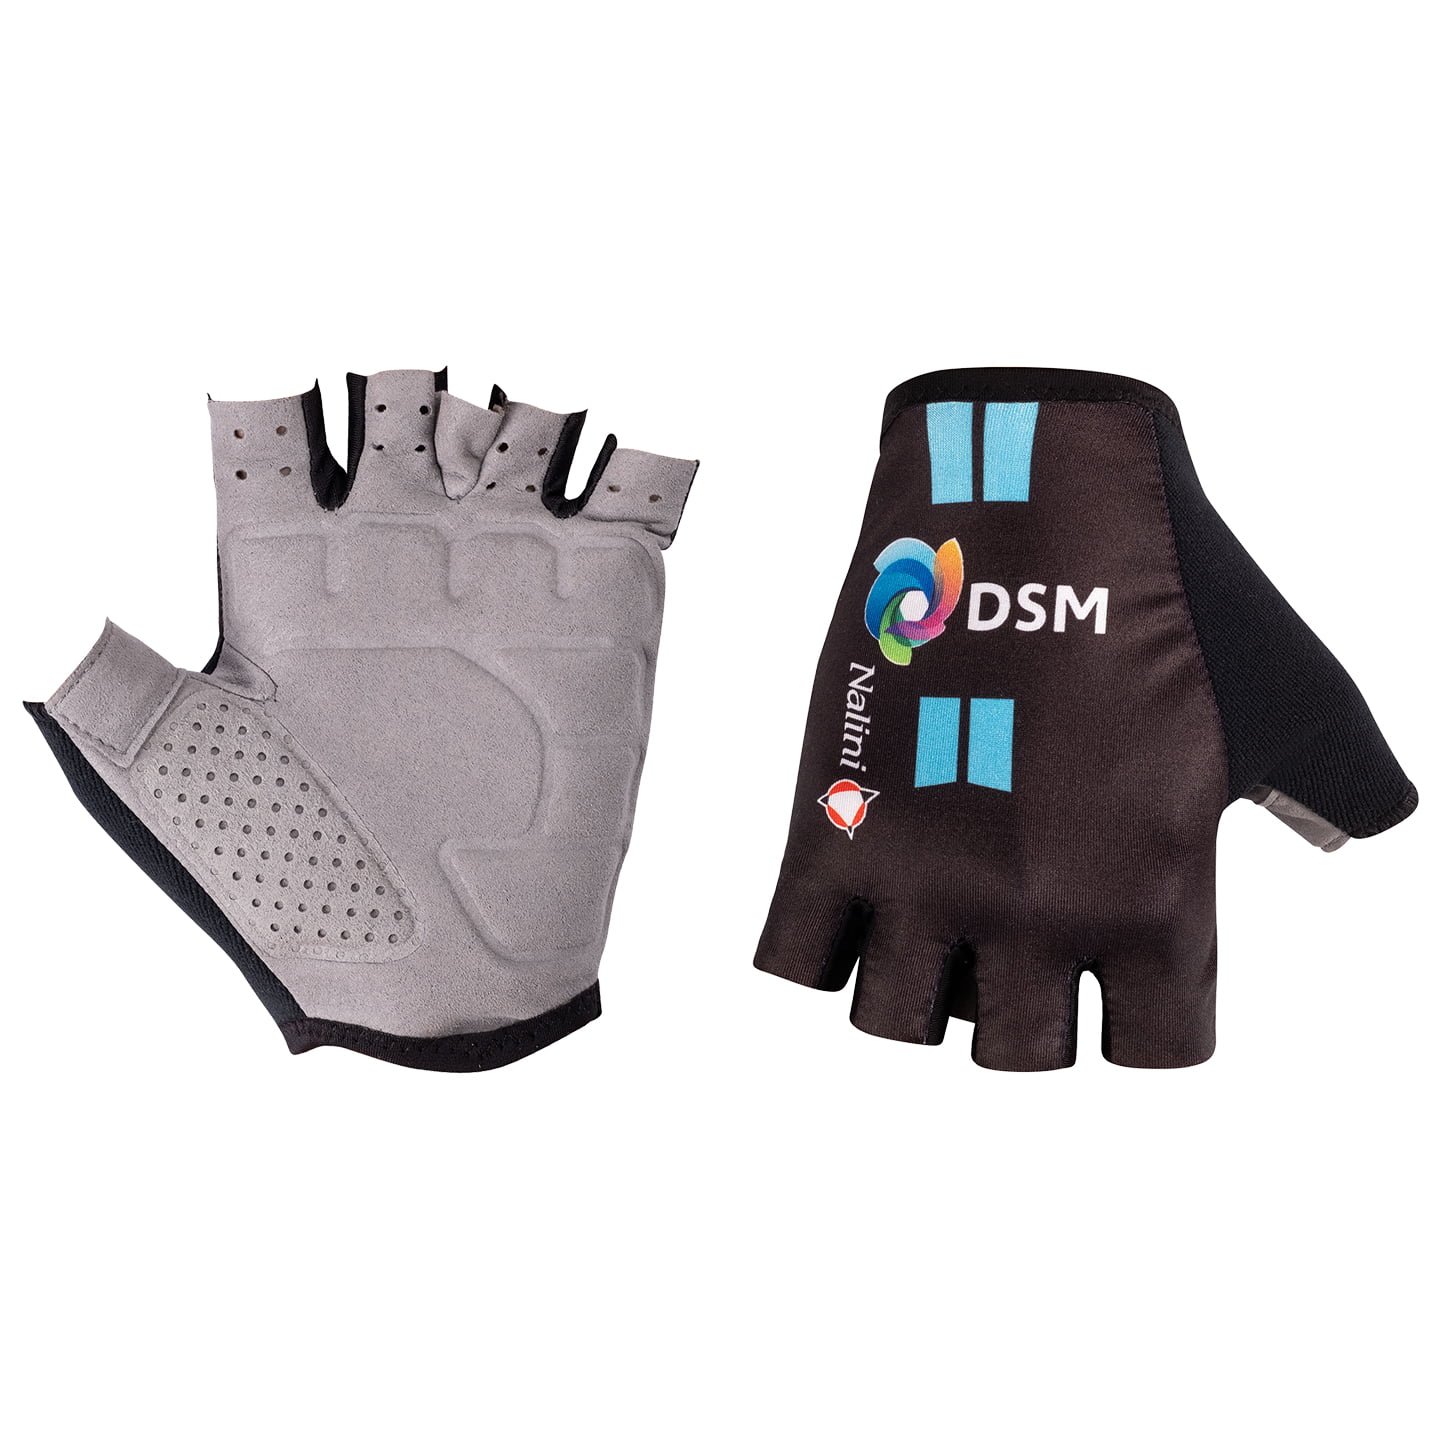 TEAM DSM 2023 Cycling Gloves, for men, size 2XL, Cycling gloves, Cycle clothing